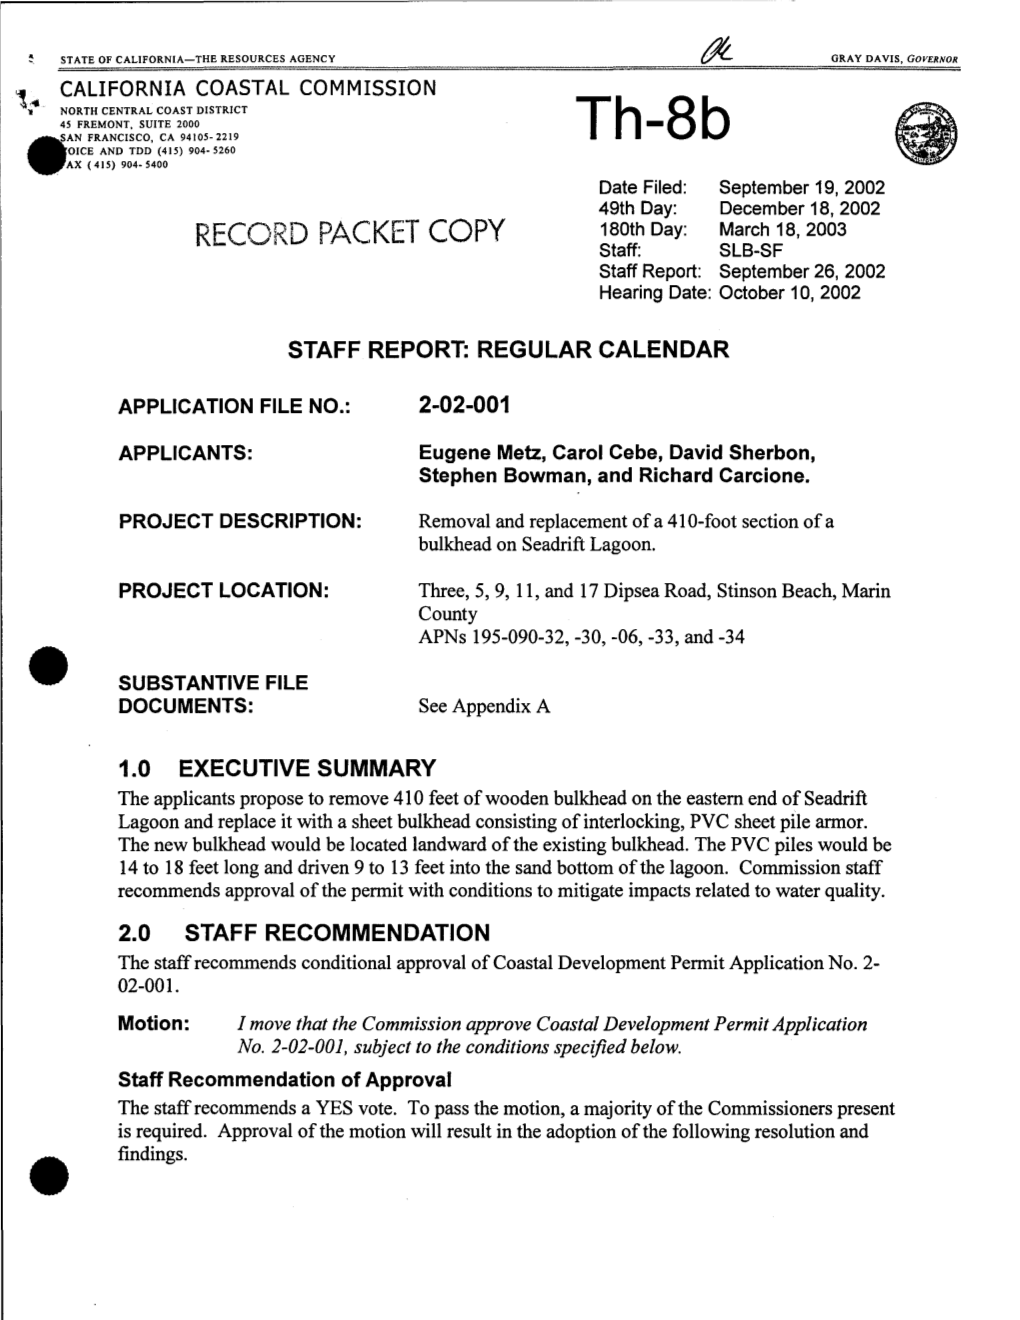 RECORD PACKET COPY 180Th Day: March 18, 2003 Staff: SLB-SF Staff Report: September 26, 2002 Hearing Date: October 10, 2002